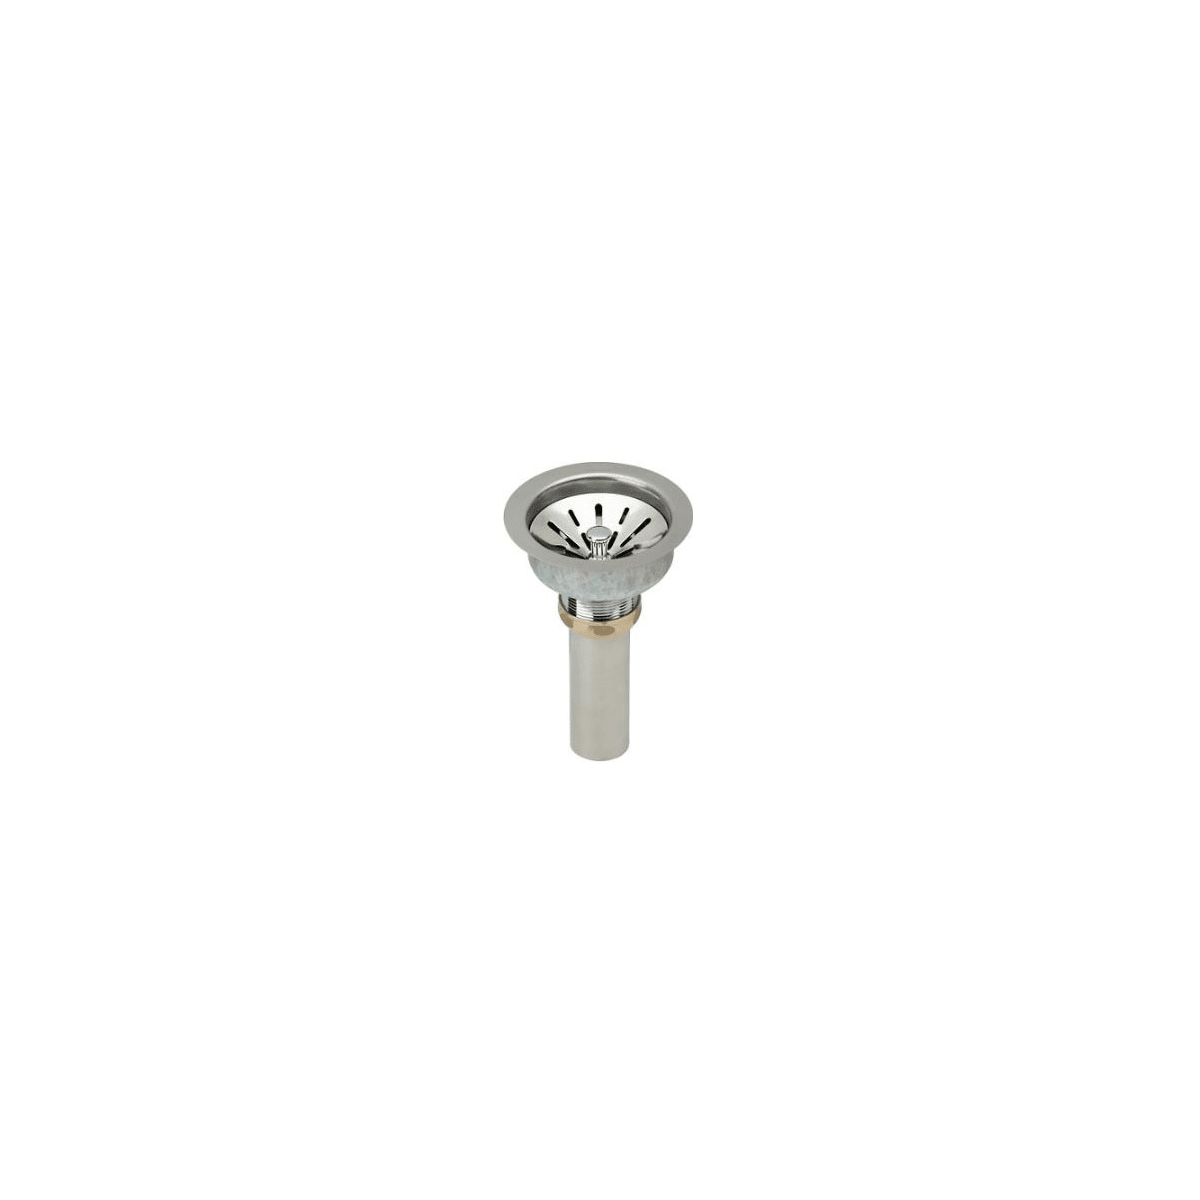 Elkay LK99 3 1/2 Basket Strainer and Tail Piece for